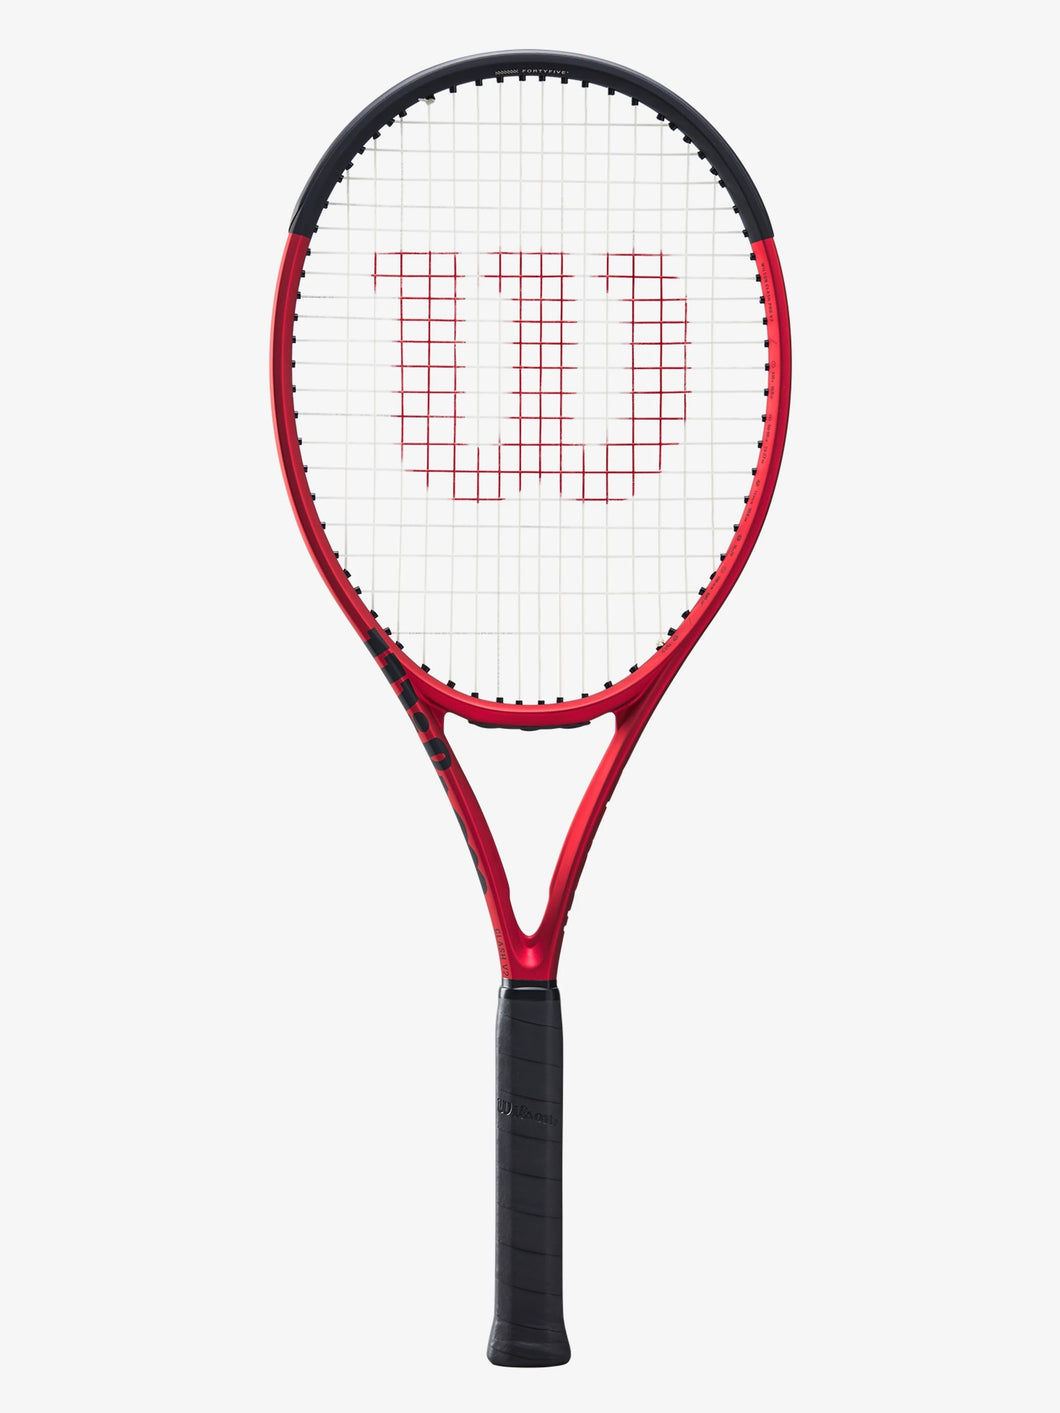 New design meets signature performance with a twist: the Clash 100 Pro v2 upgrades playability while maintaining the remarkable blend of flexibility and stability synonymous with the Clash franchise.